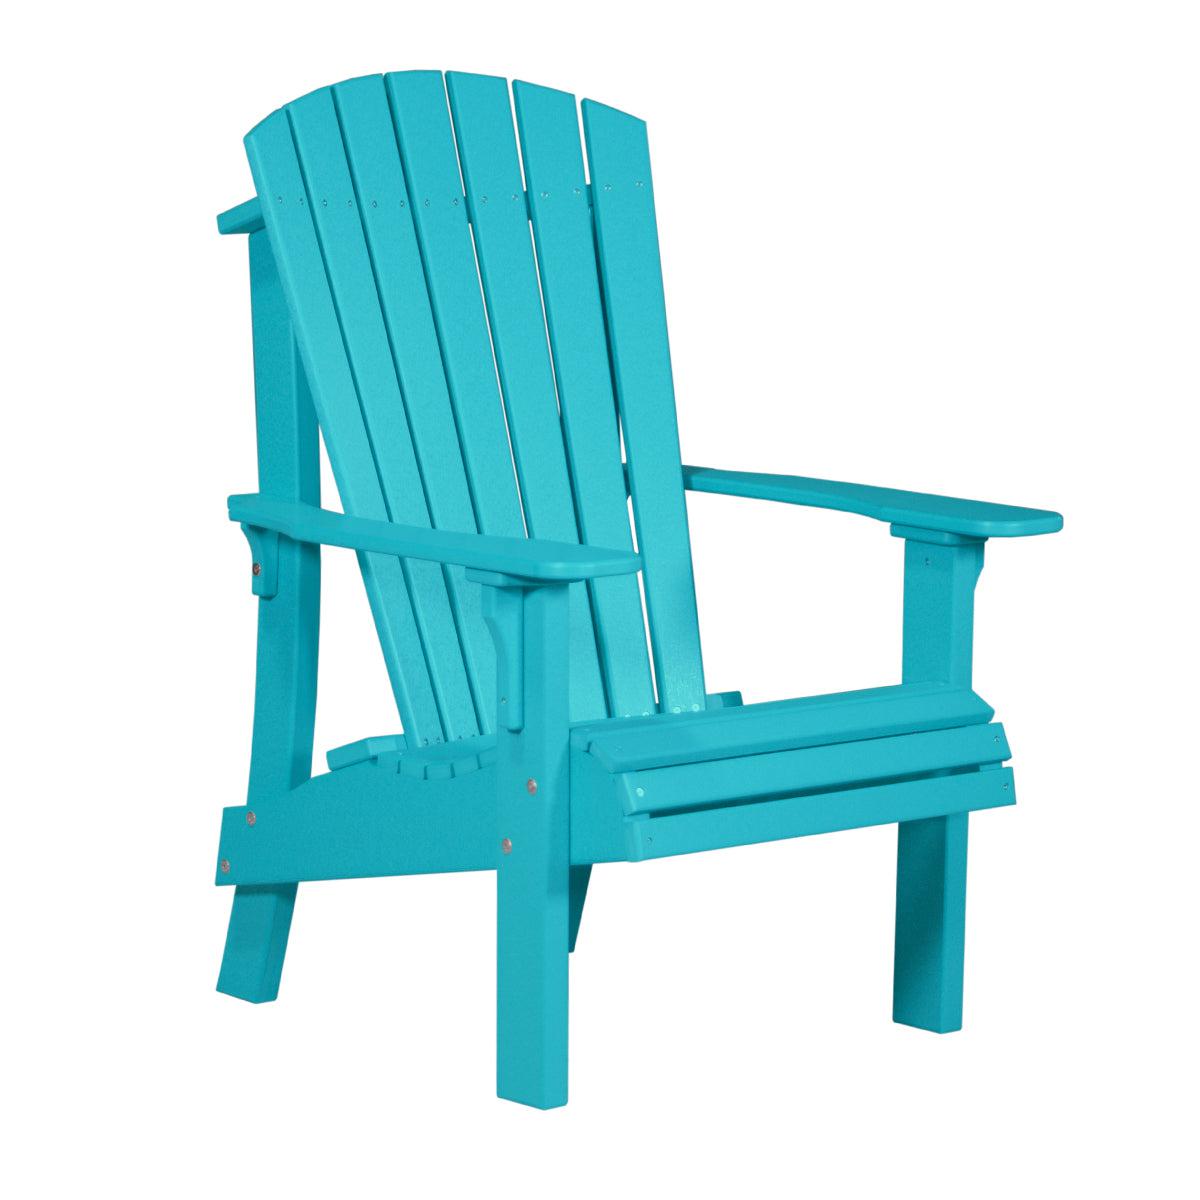 LuxCraft Recycled Plastic Royal Adirondack Chair with Elevated Seat Height  - LEAD TIME TO SHIP 10 to 12 BUSINESS DAYS